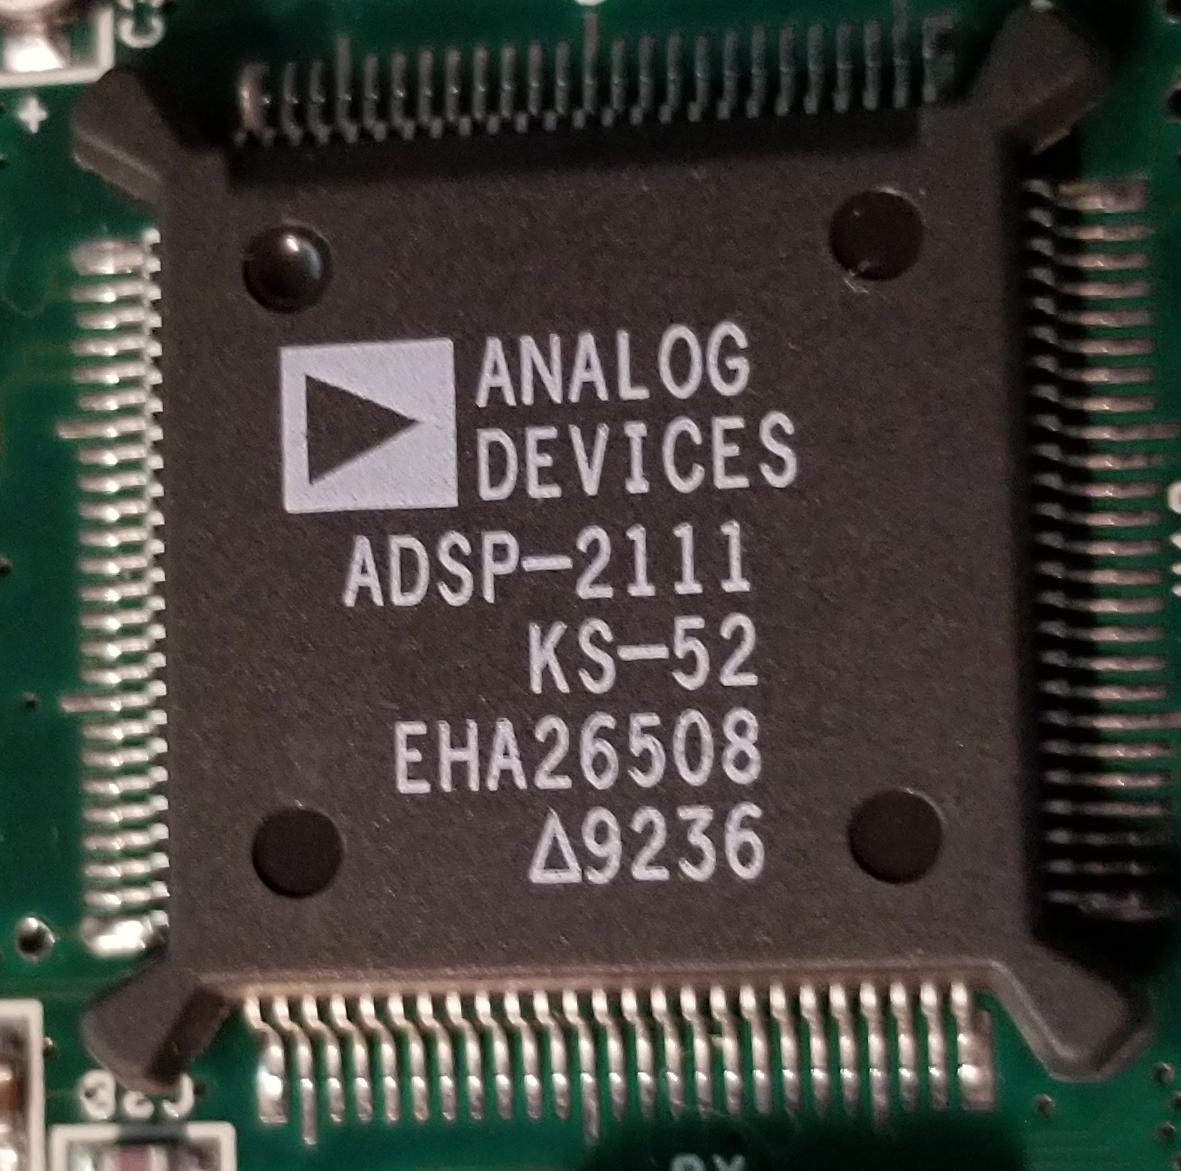 But while we're here, let's figure out what all these chips are.First we've got an Analog Devices ADSP-2111. This is a 16-bit DSP chip.